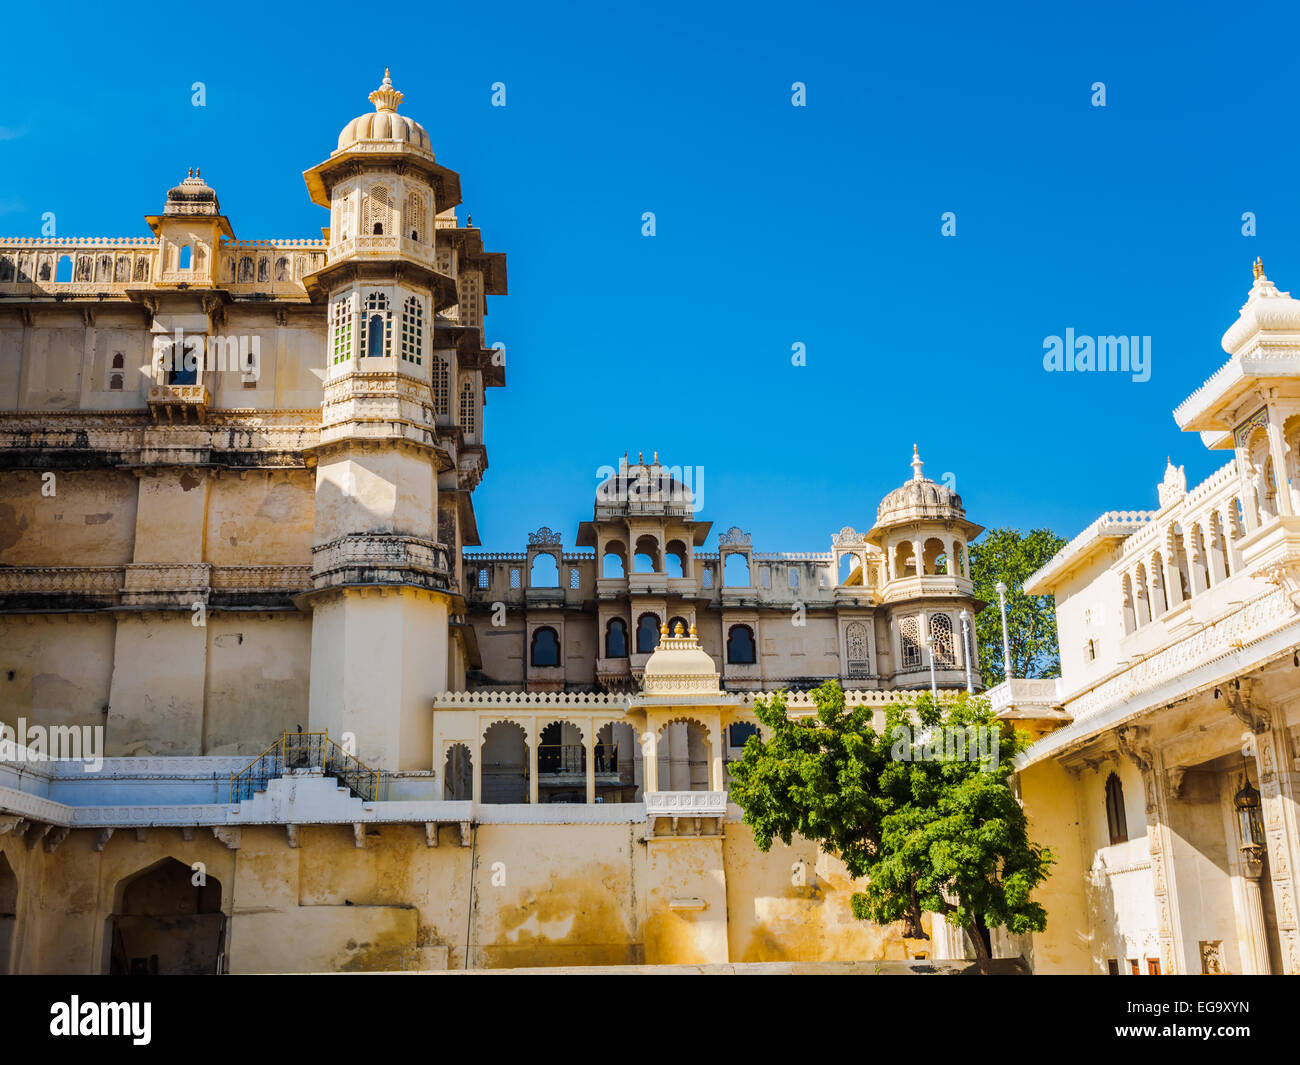 Udaipur City Palace on the Banks of Lake Pichola in Rajasthan, India Stock Photo